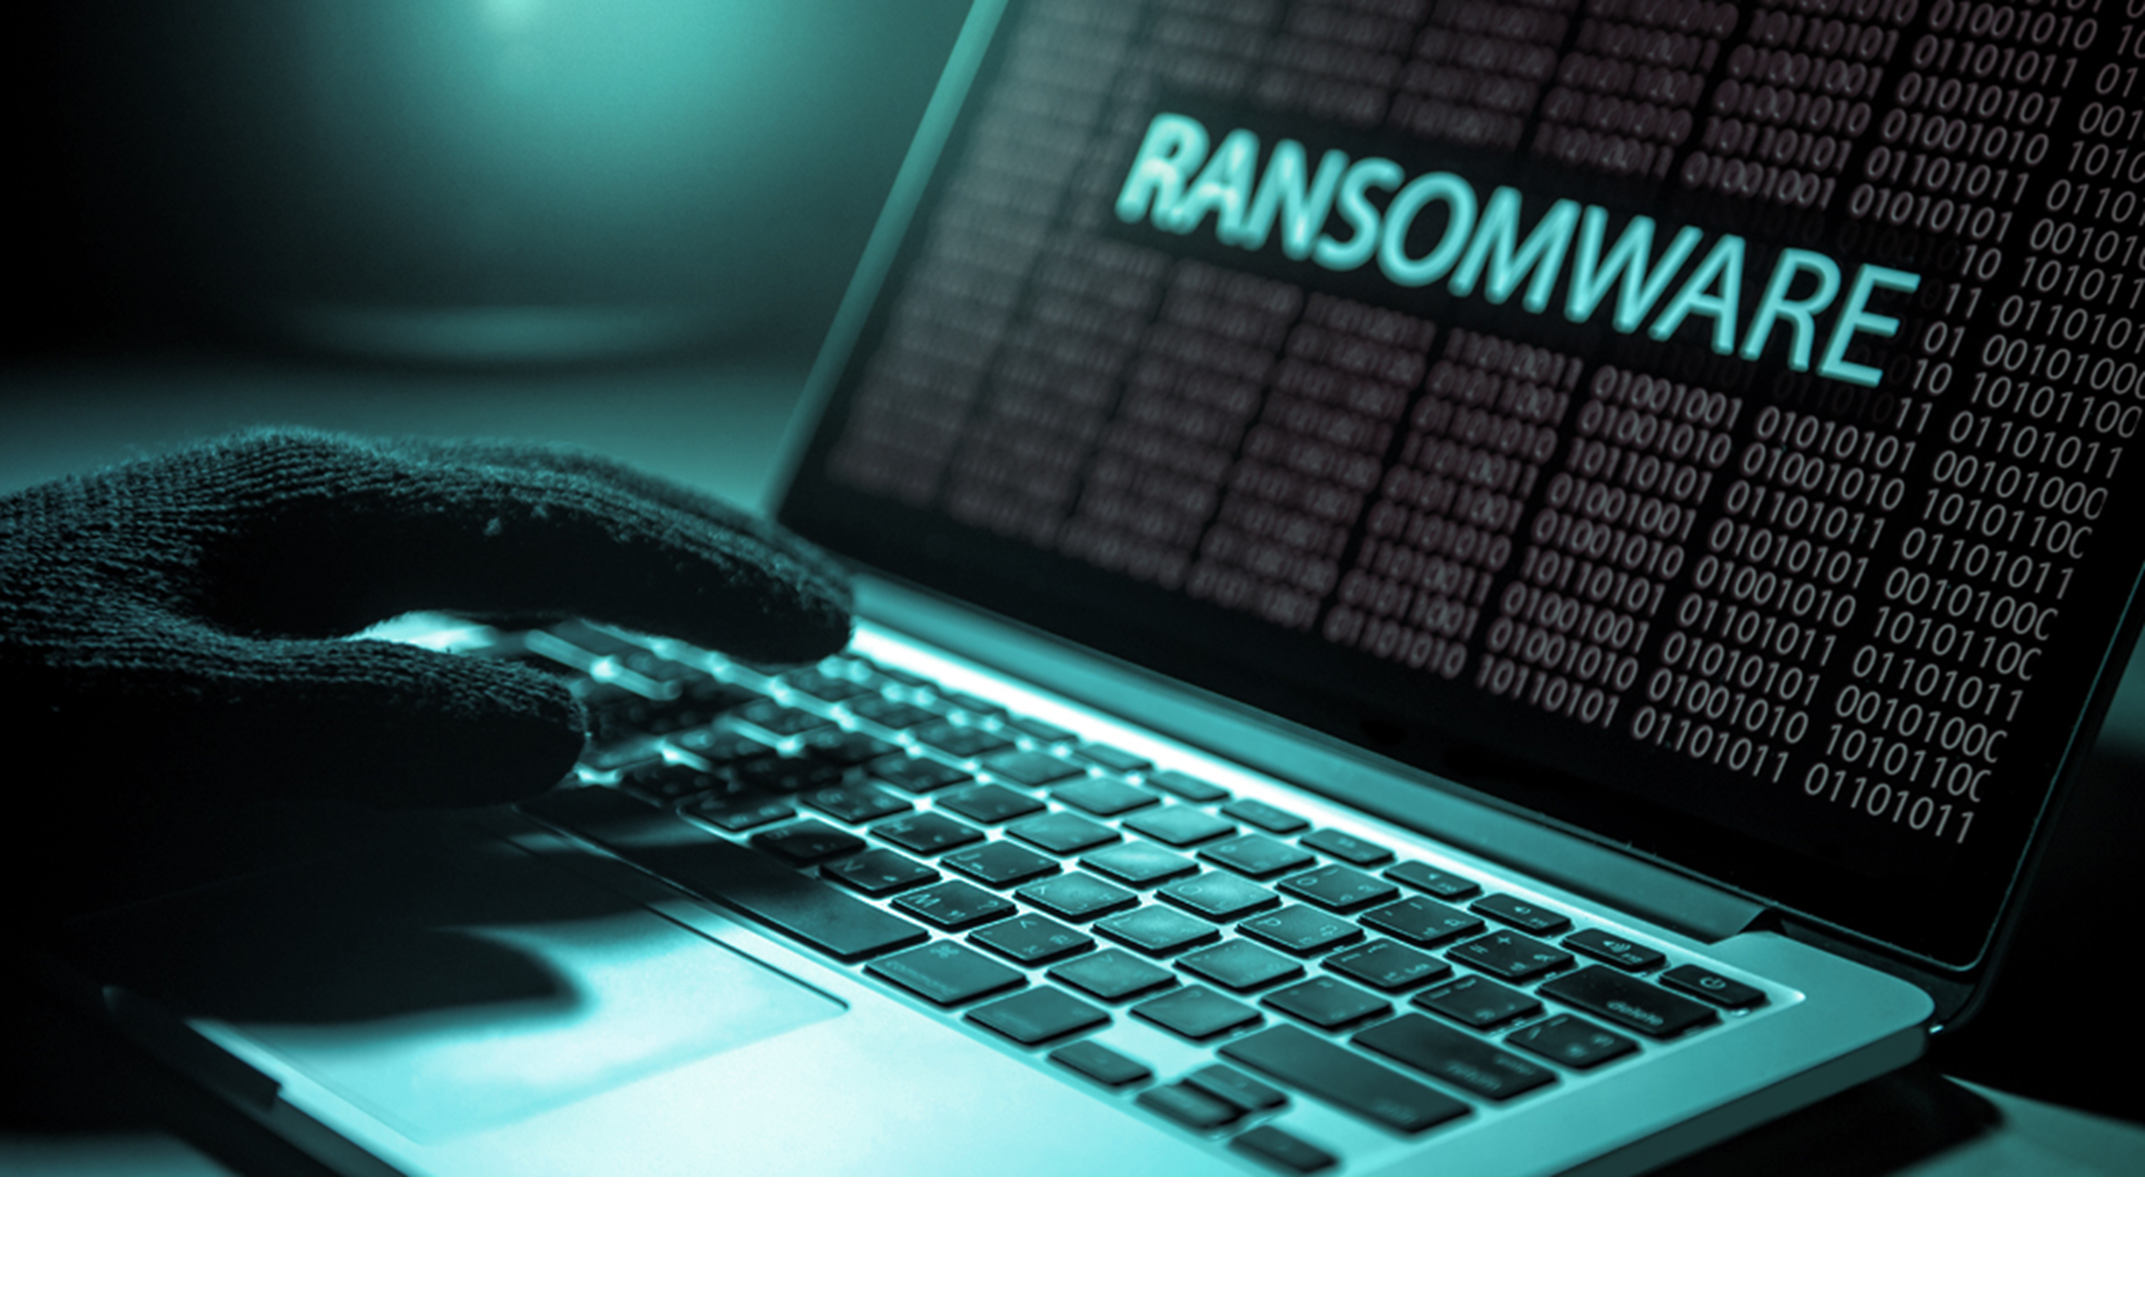 Ransomware Attacks: To deal transparently and pay the ransom or not to pay